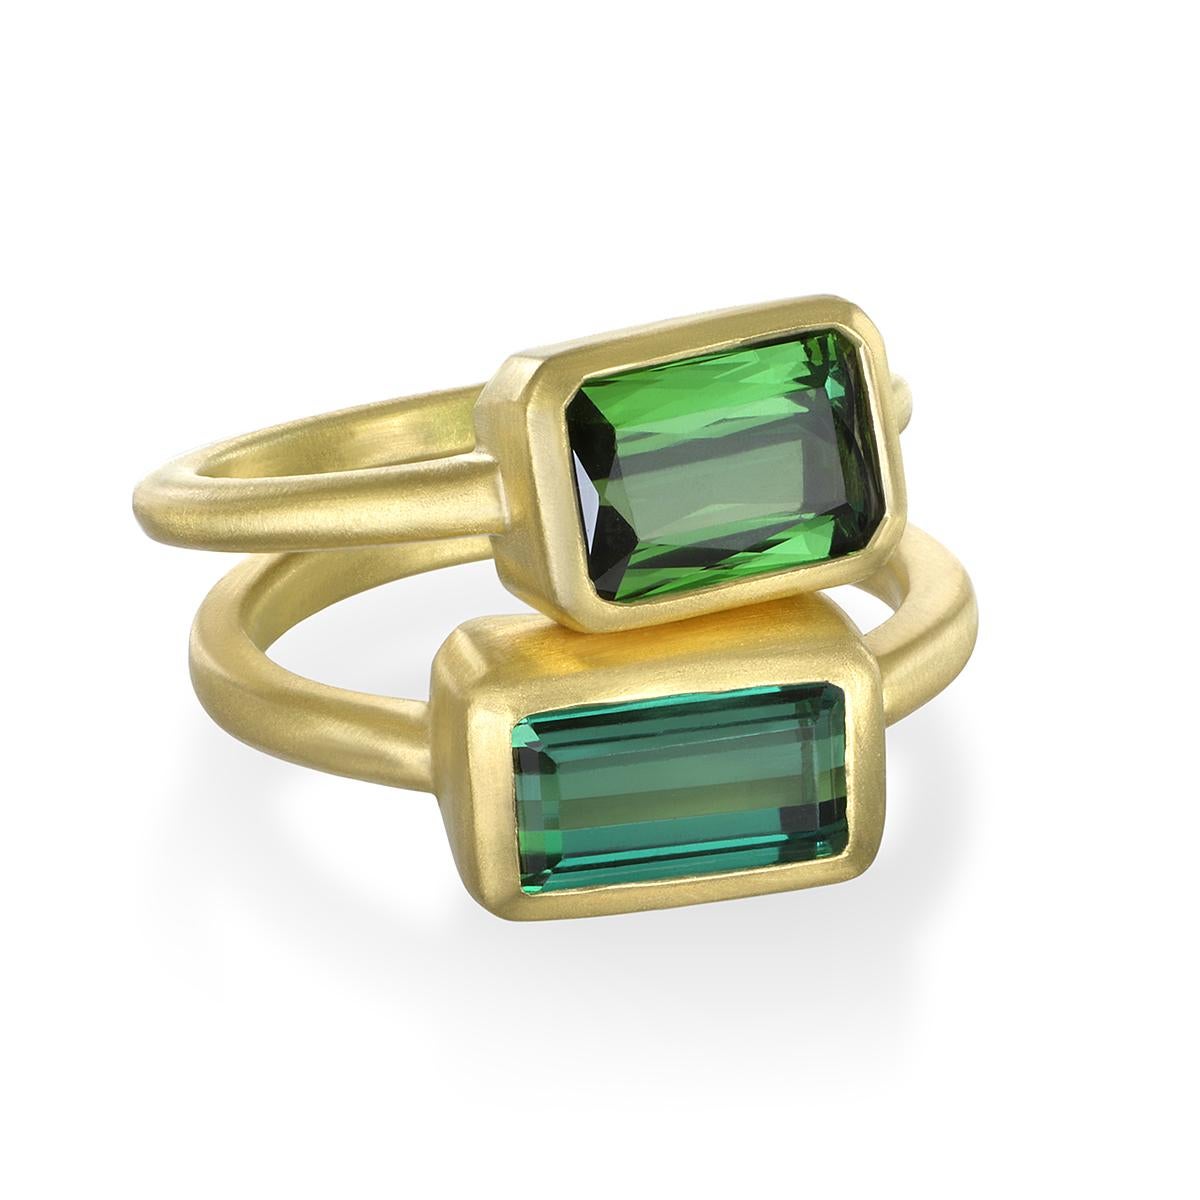 Faye Kim's signature 18K gold* Green Tourmaline Bezel Baguette Ring, with its French cut and matte finish, is beautiful worn alone or stacked with other rings. It offers both a contemporary and timeless elegance and feel, and is available in other